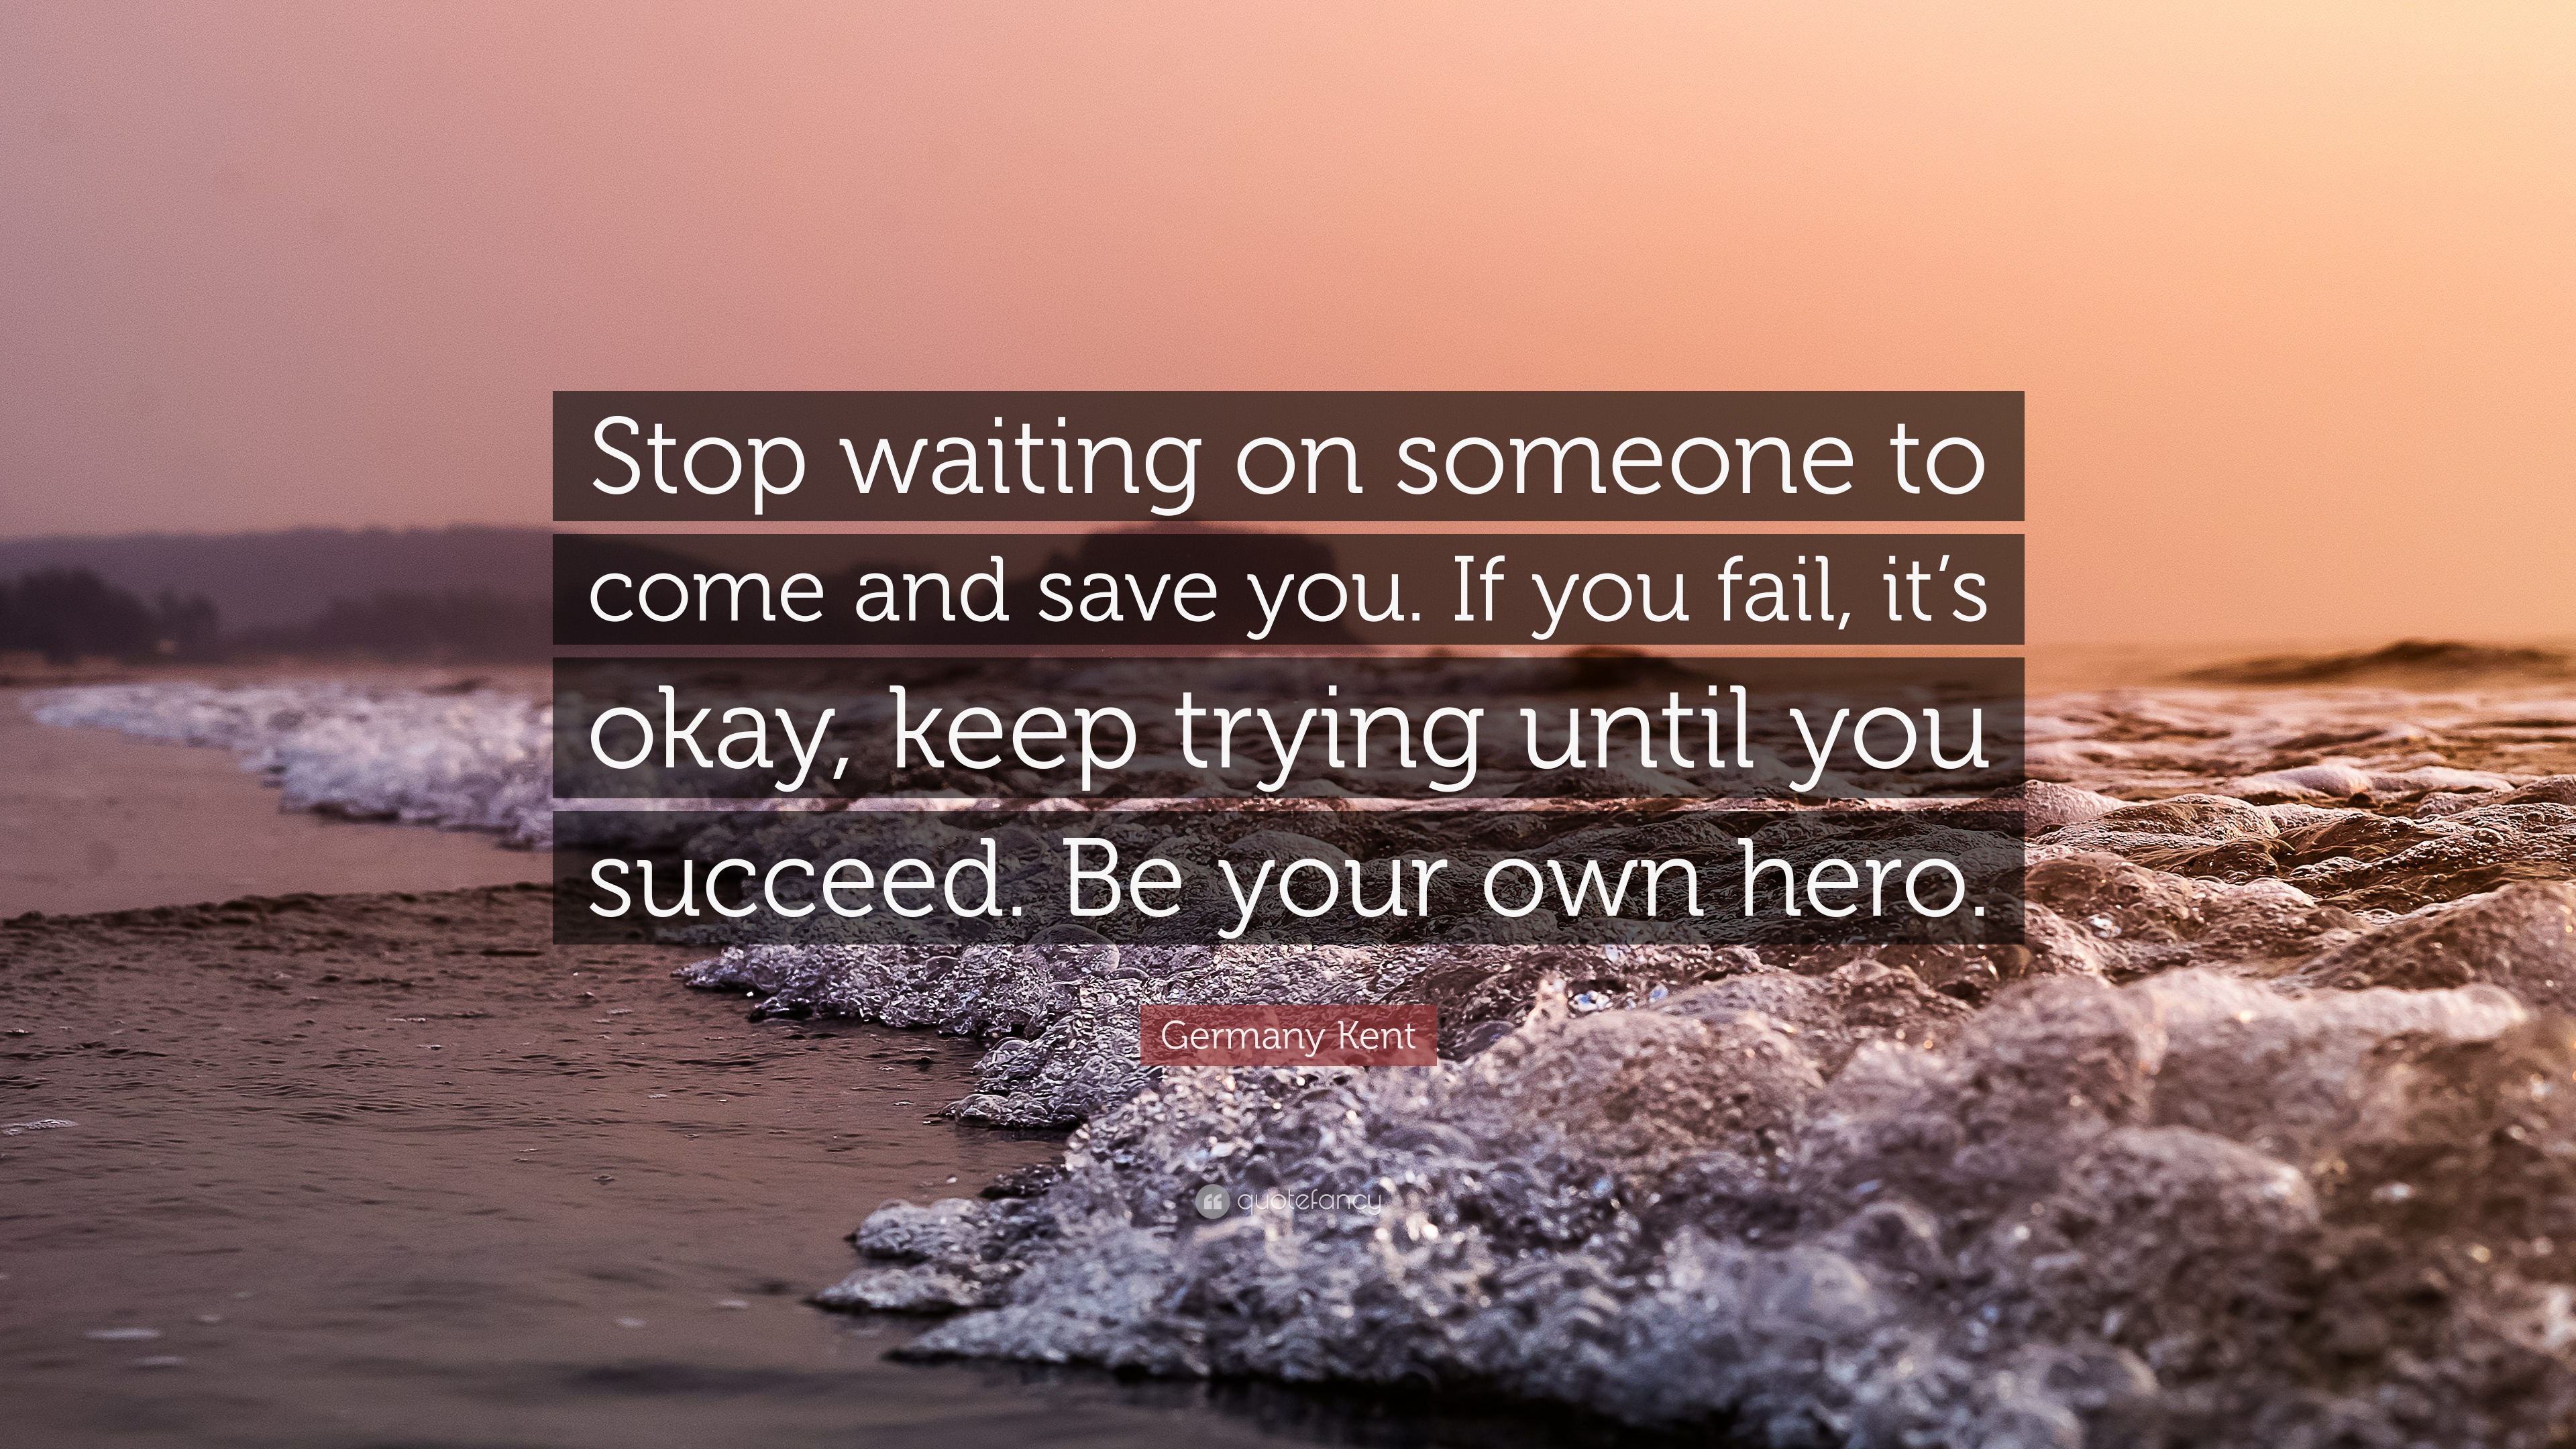 Germany Kent Quote: “Stop waiting on someone to come and save you. If ...